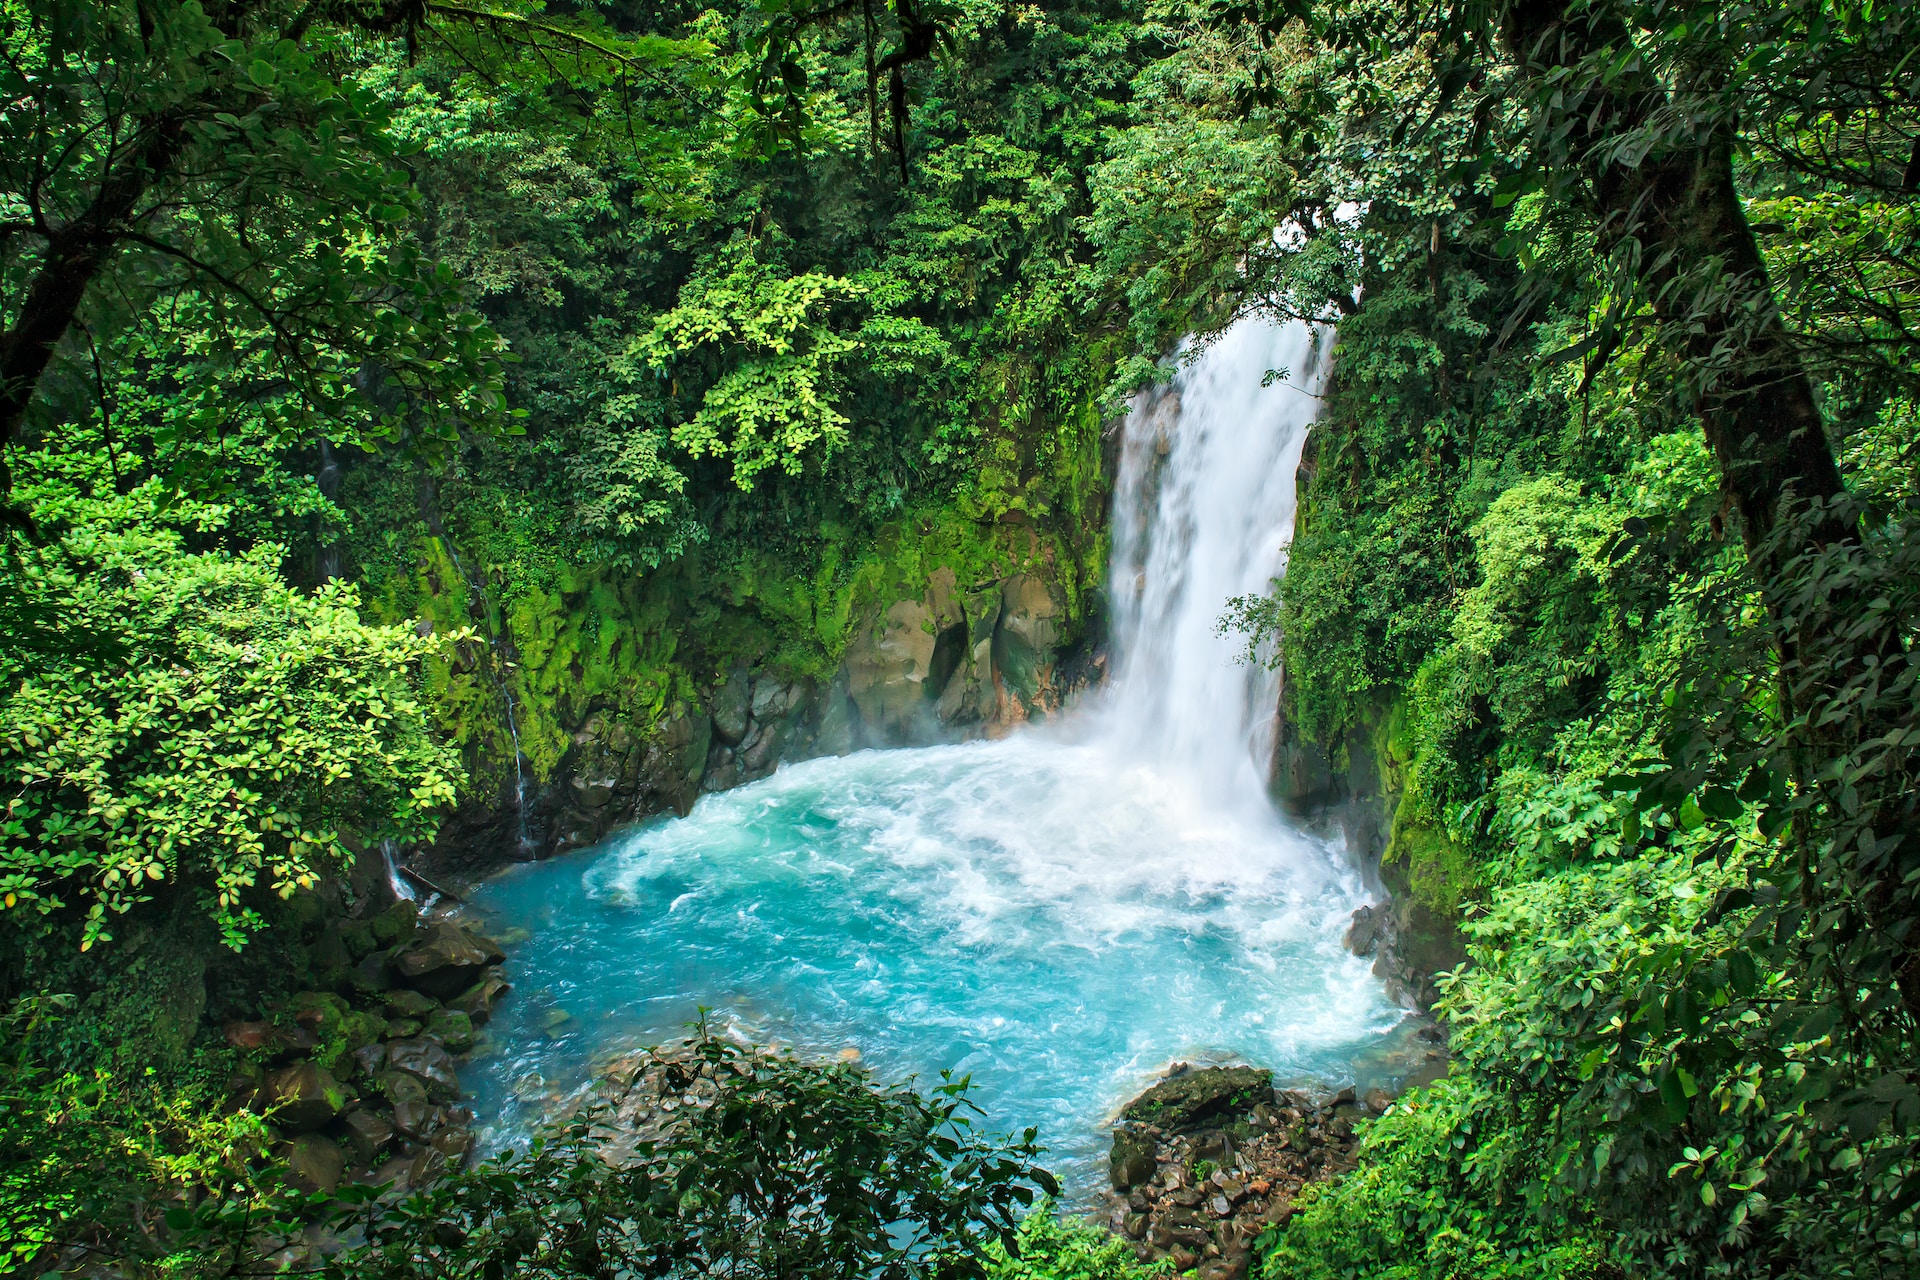 Here are the best times to visit Costa Rica